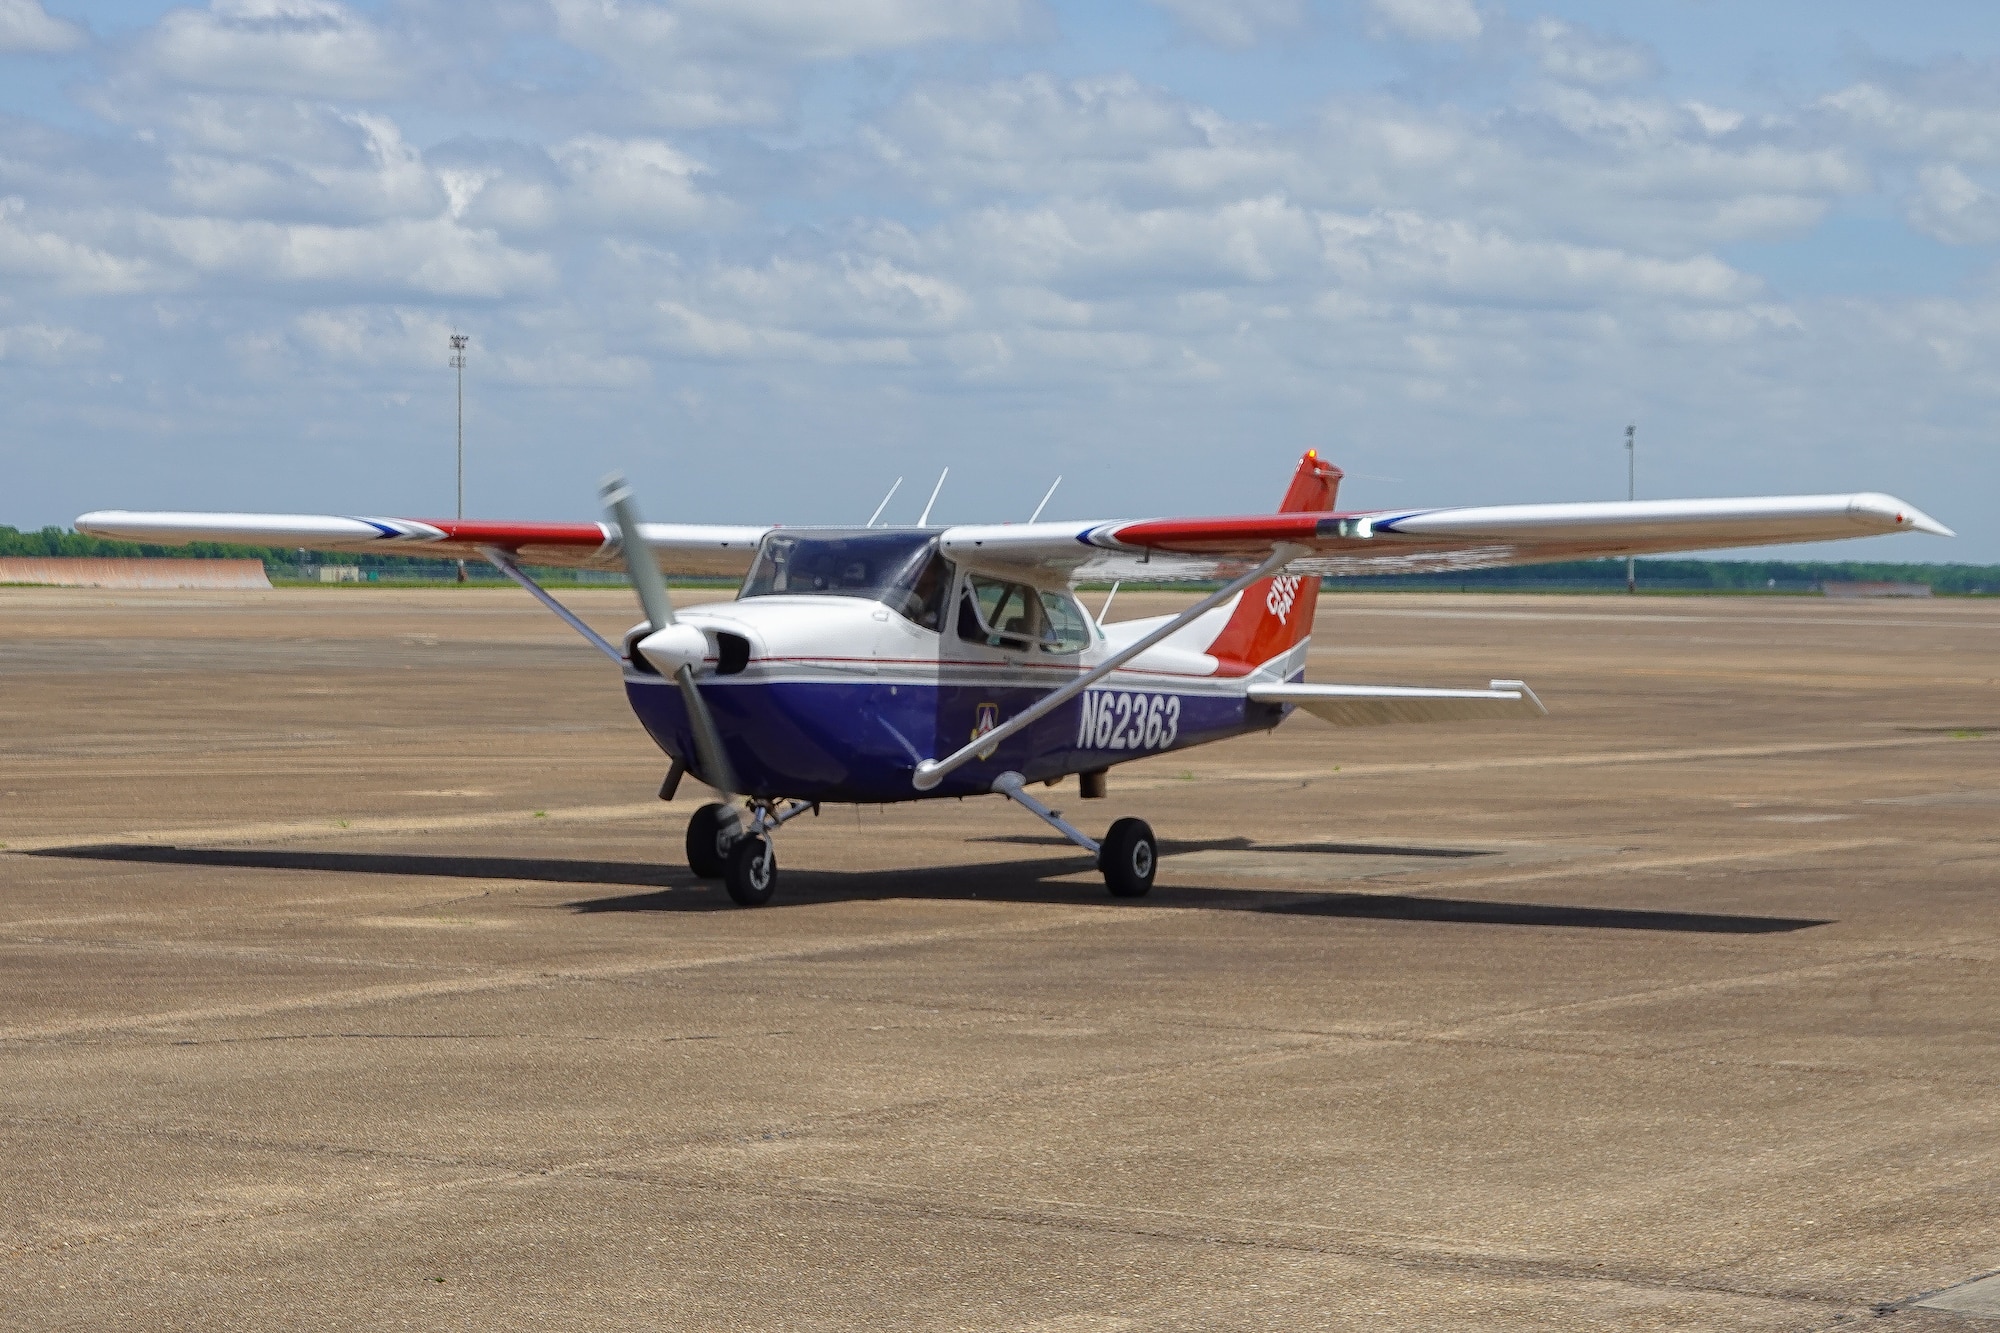 A Civil Air Patrol Cessna 182 Skylane, prepares for take-off during a Mid-Air Collision Avoidance safety flight at Barksdale Air Force Base, Louisiana, May 28, 2021. Introduced in 1956, the Cessna 182 has been produced in a number of variants, including a version with retractable landing gear, and is the second most popular Cessna model still in production, after the Cessna 172. (Courtesy photo by Capt. Dustin Martin)